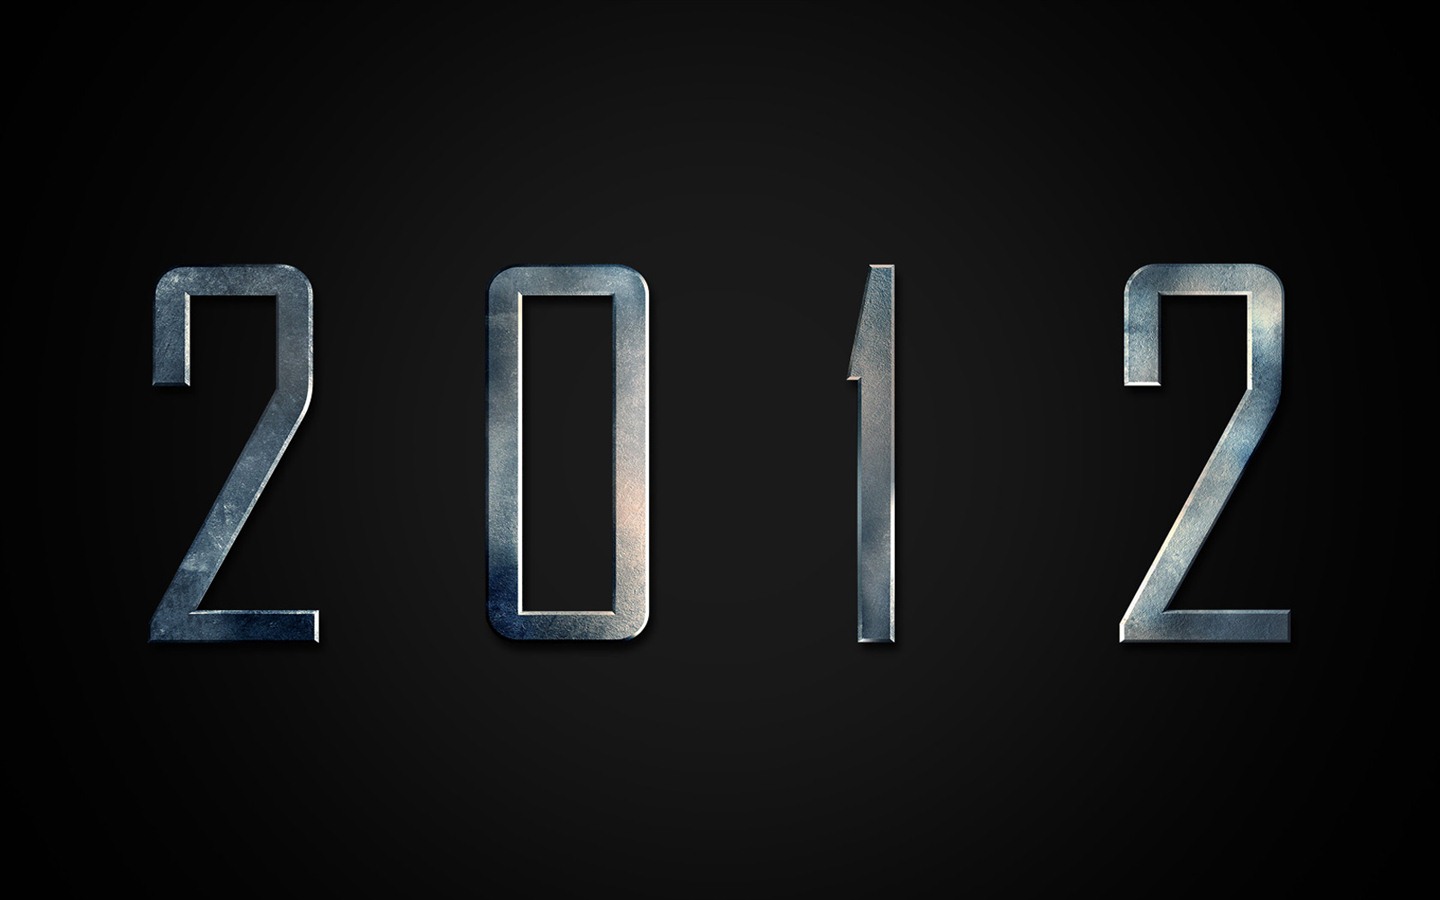 2012 New Year wallpapers (1) #12 - 1440x900